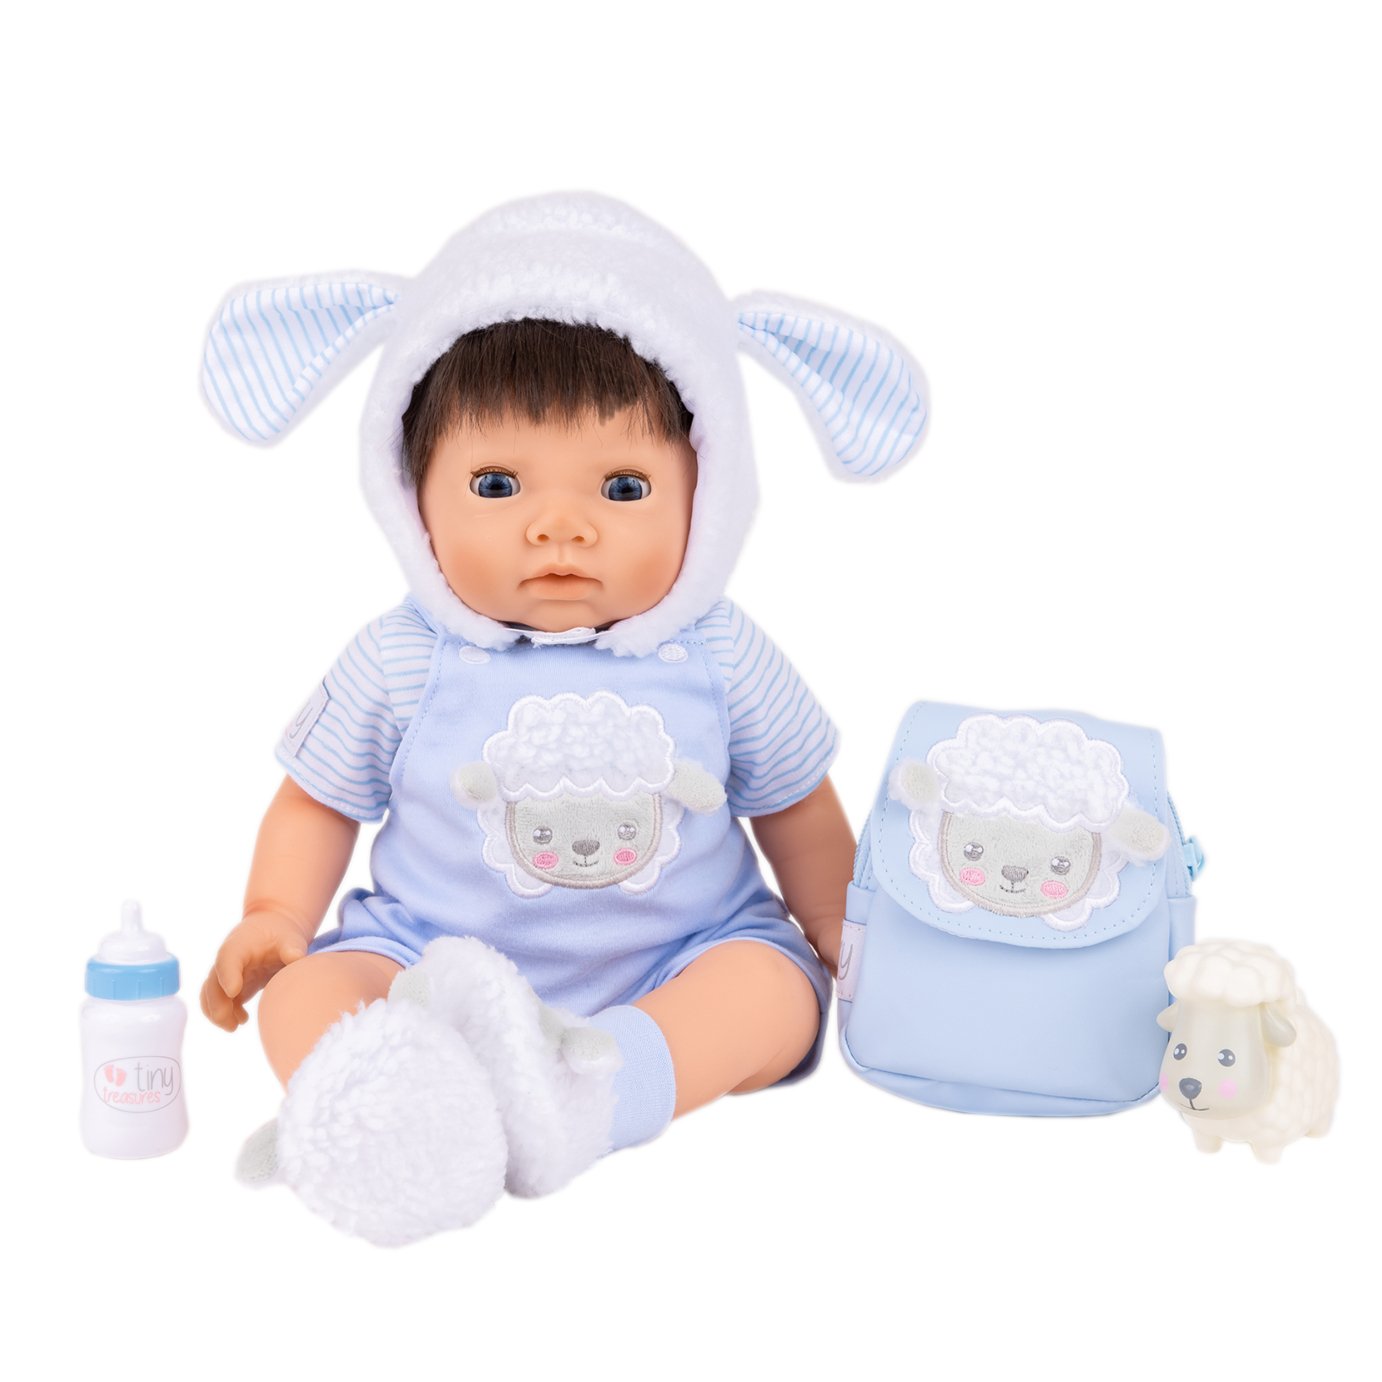 Tiny Treasures Little Lamb Outfit Set in Blue